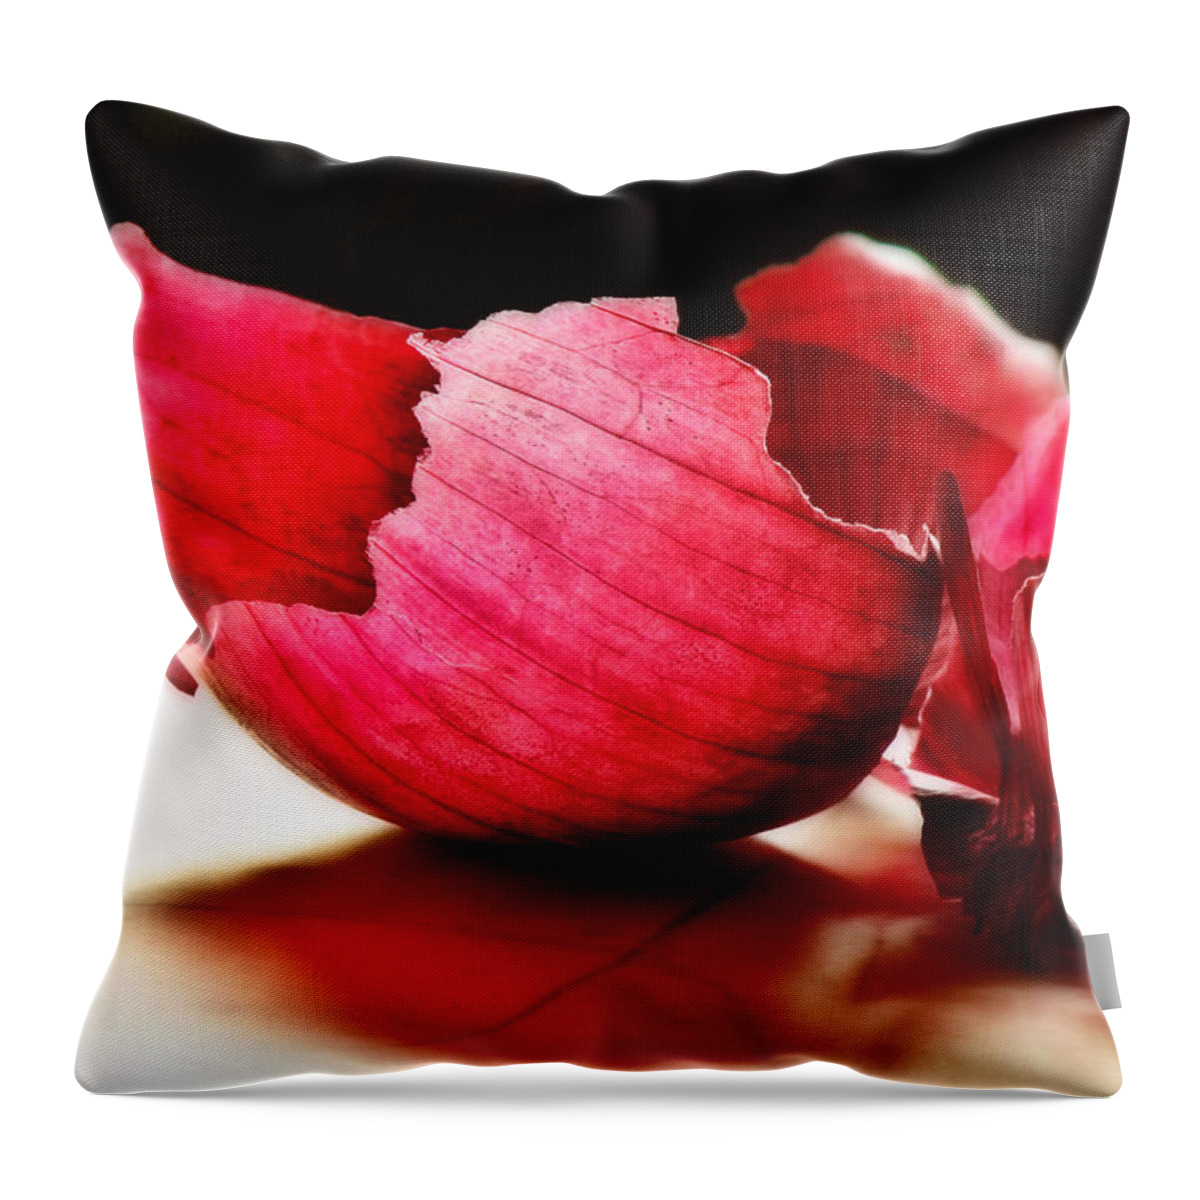 Onion Throw Pillow featuring the photograph Skin by John Poon